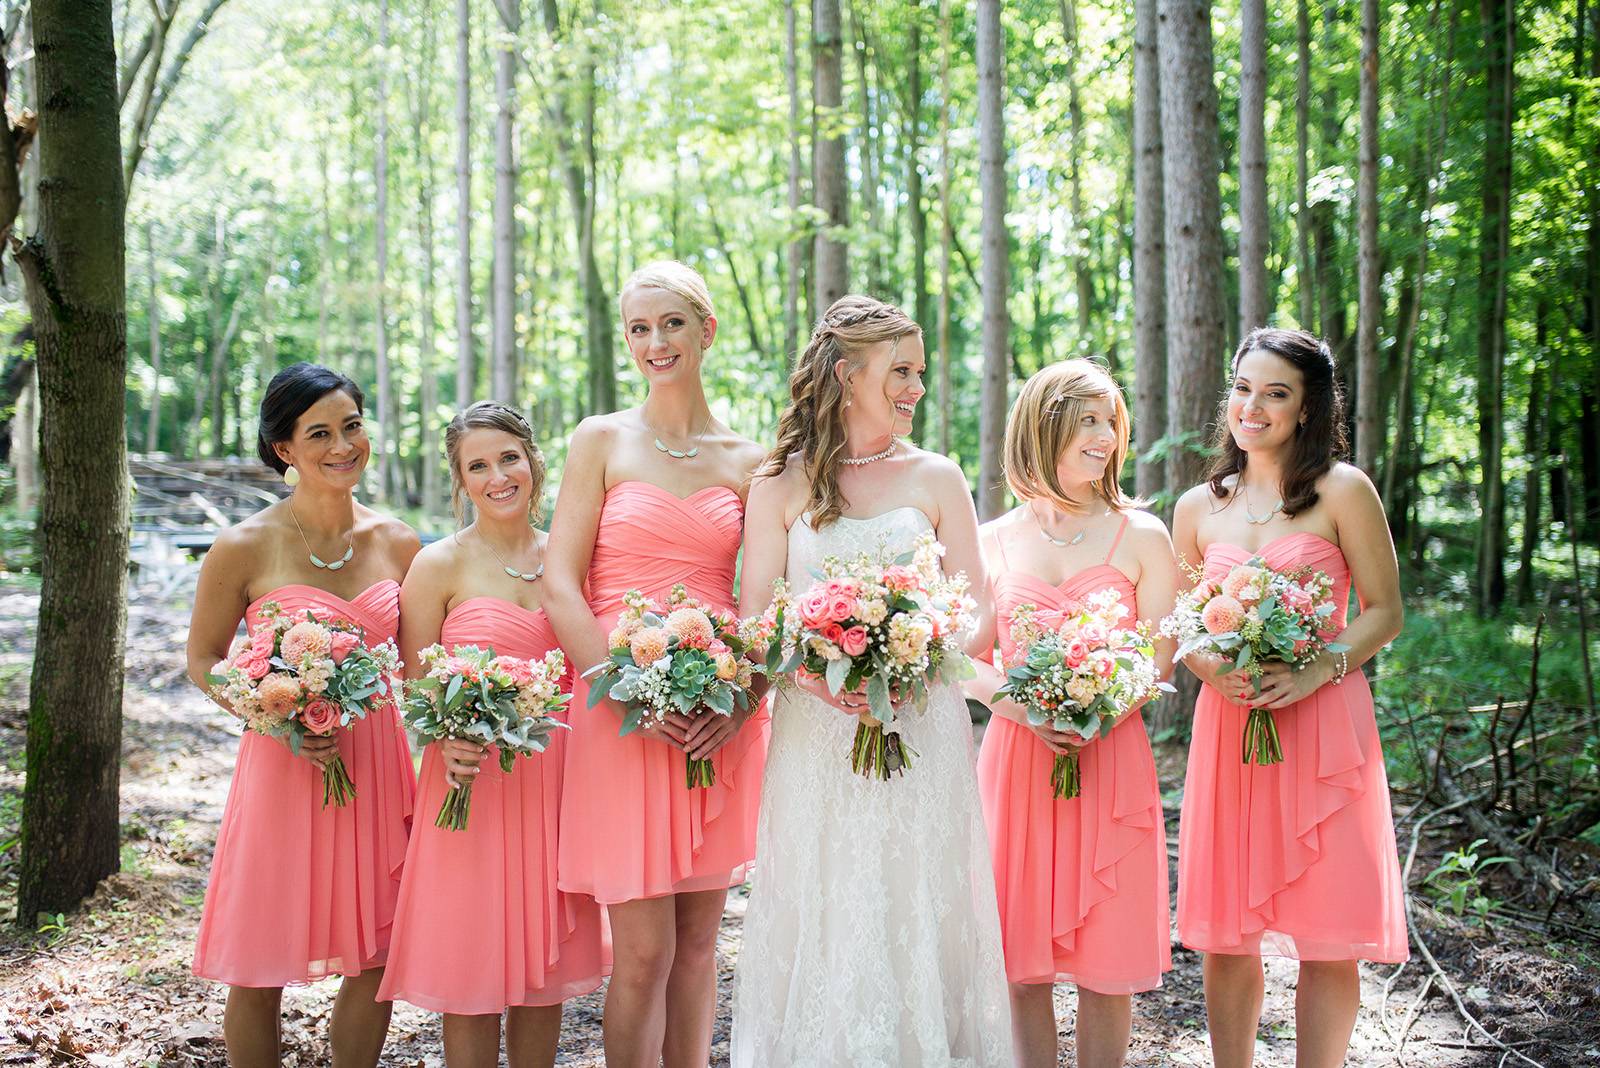 coral bridesmaid dresses, coral pink wedding flowers bouquet, wedding gown, wedding dress